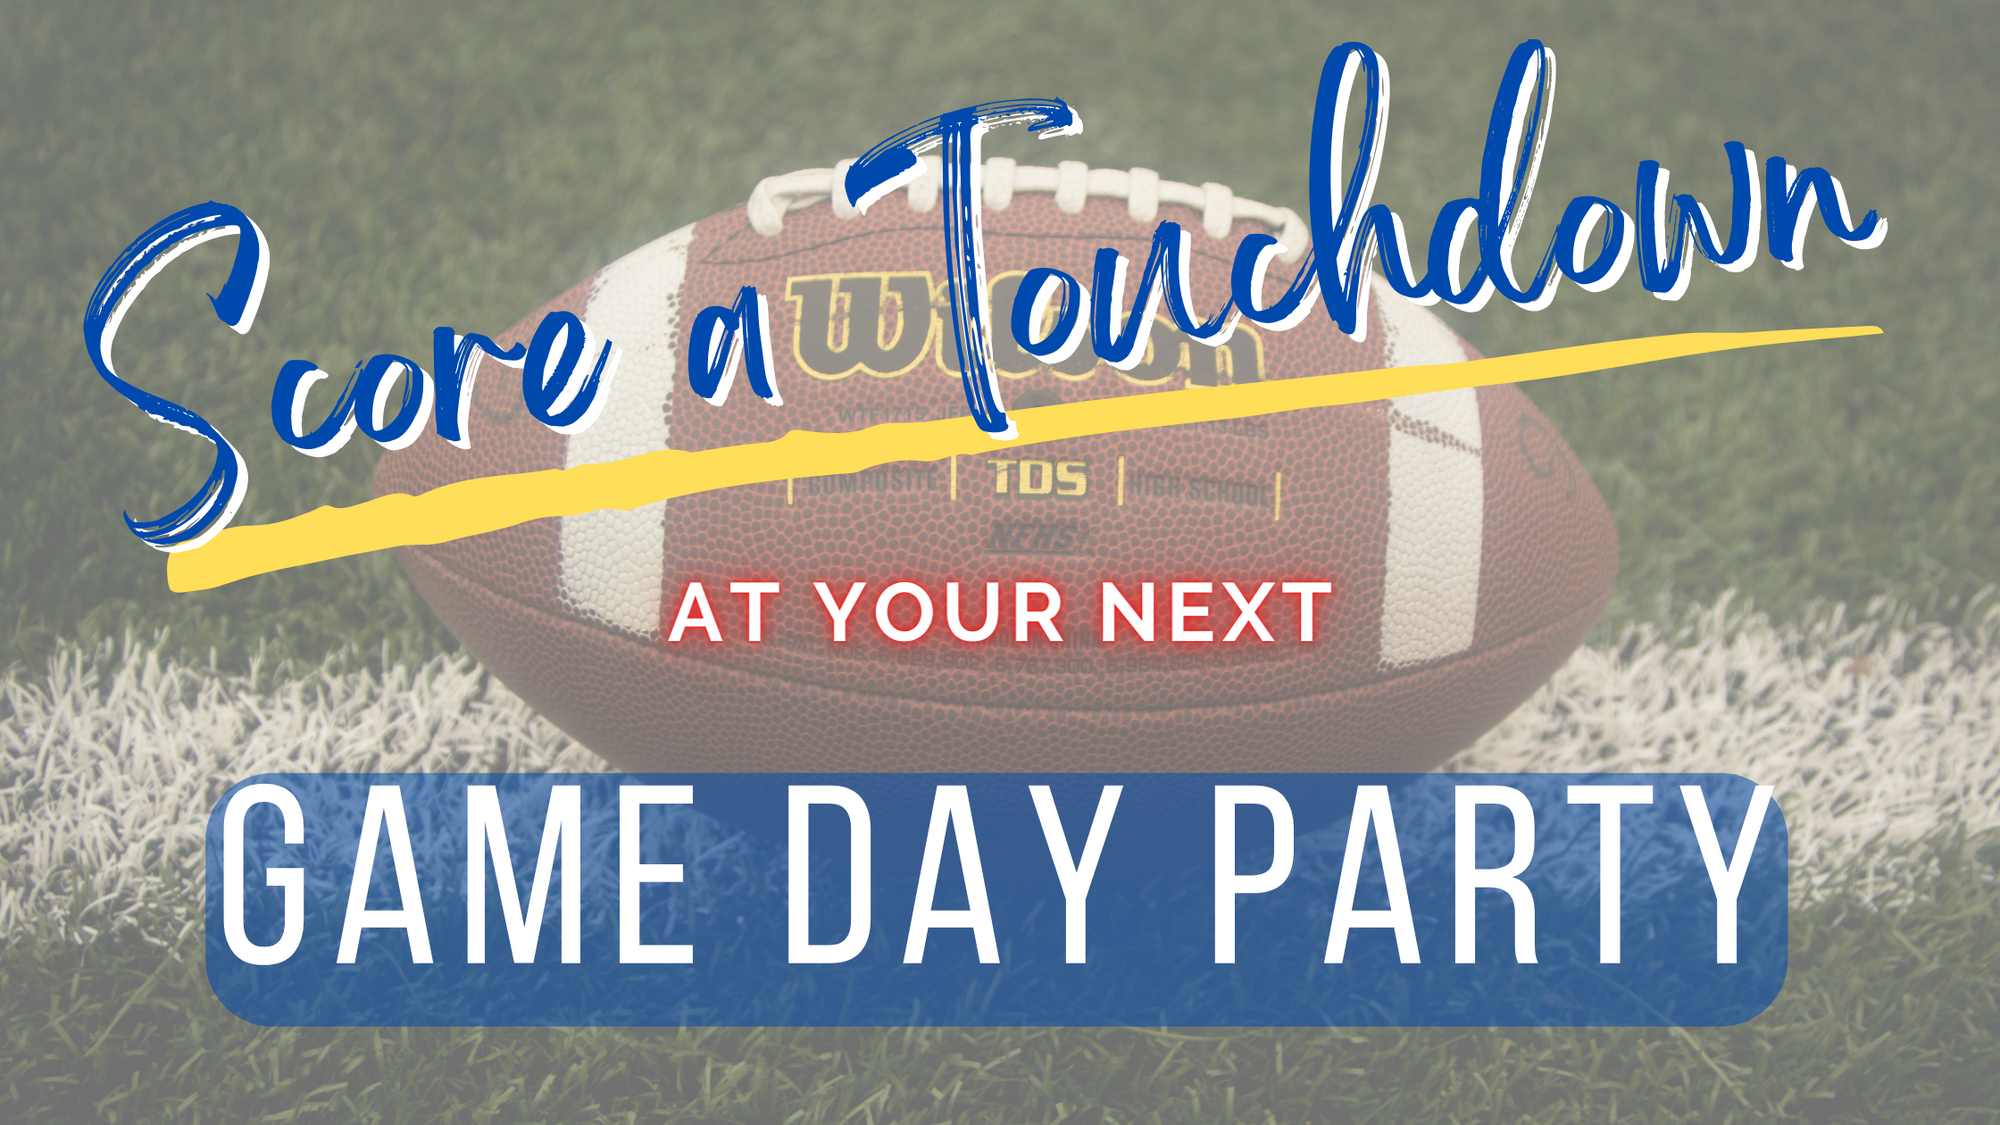 Score a Touchdown at Your Next Game Day Party